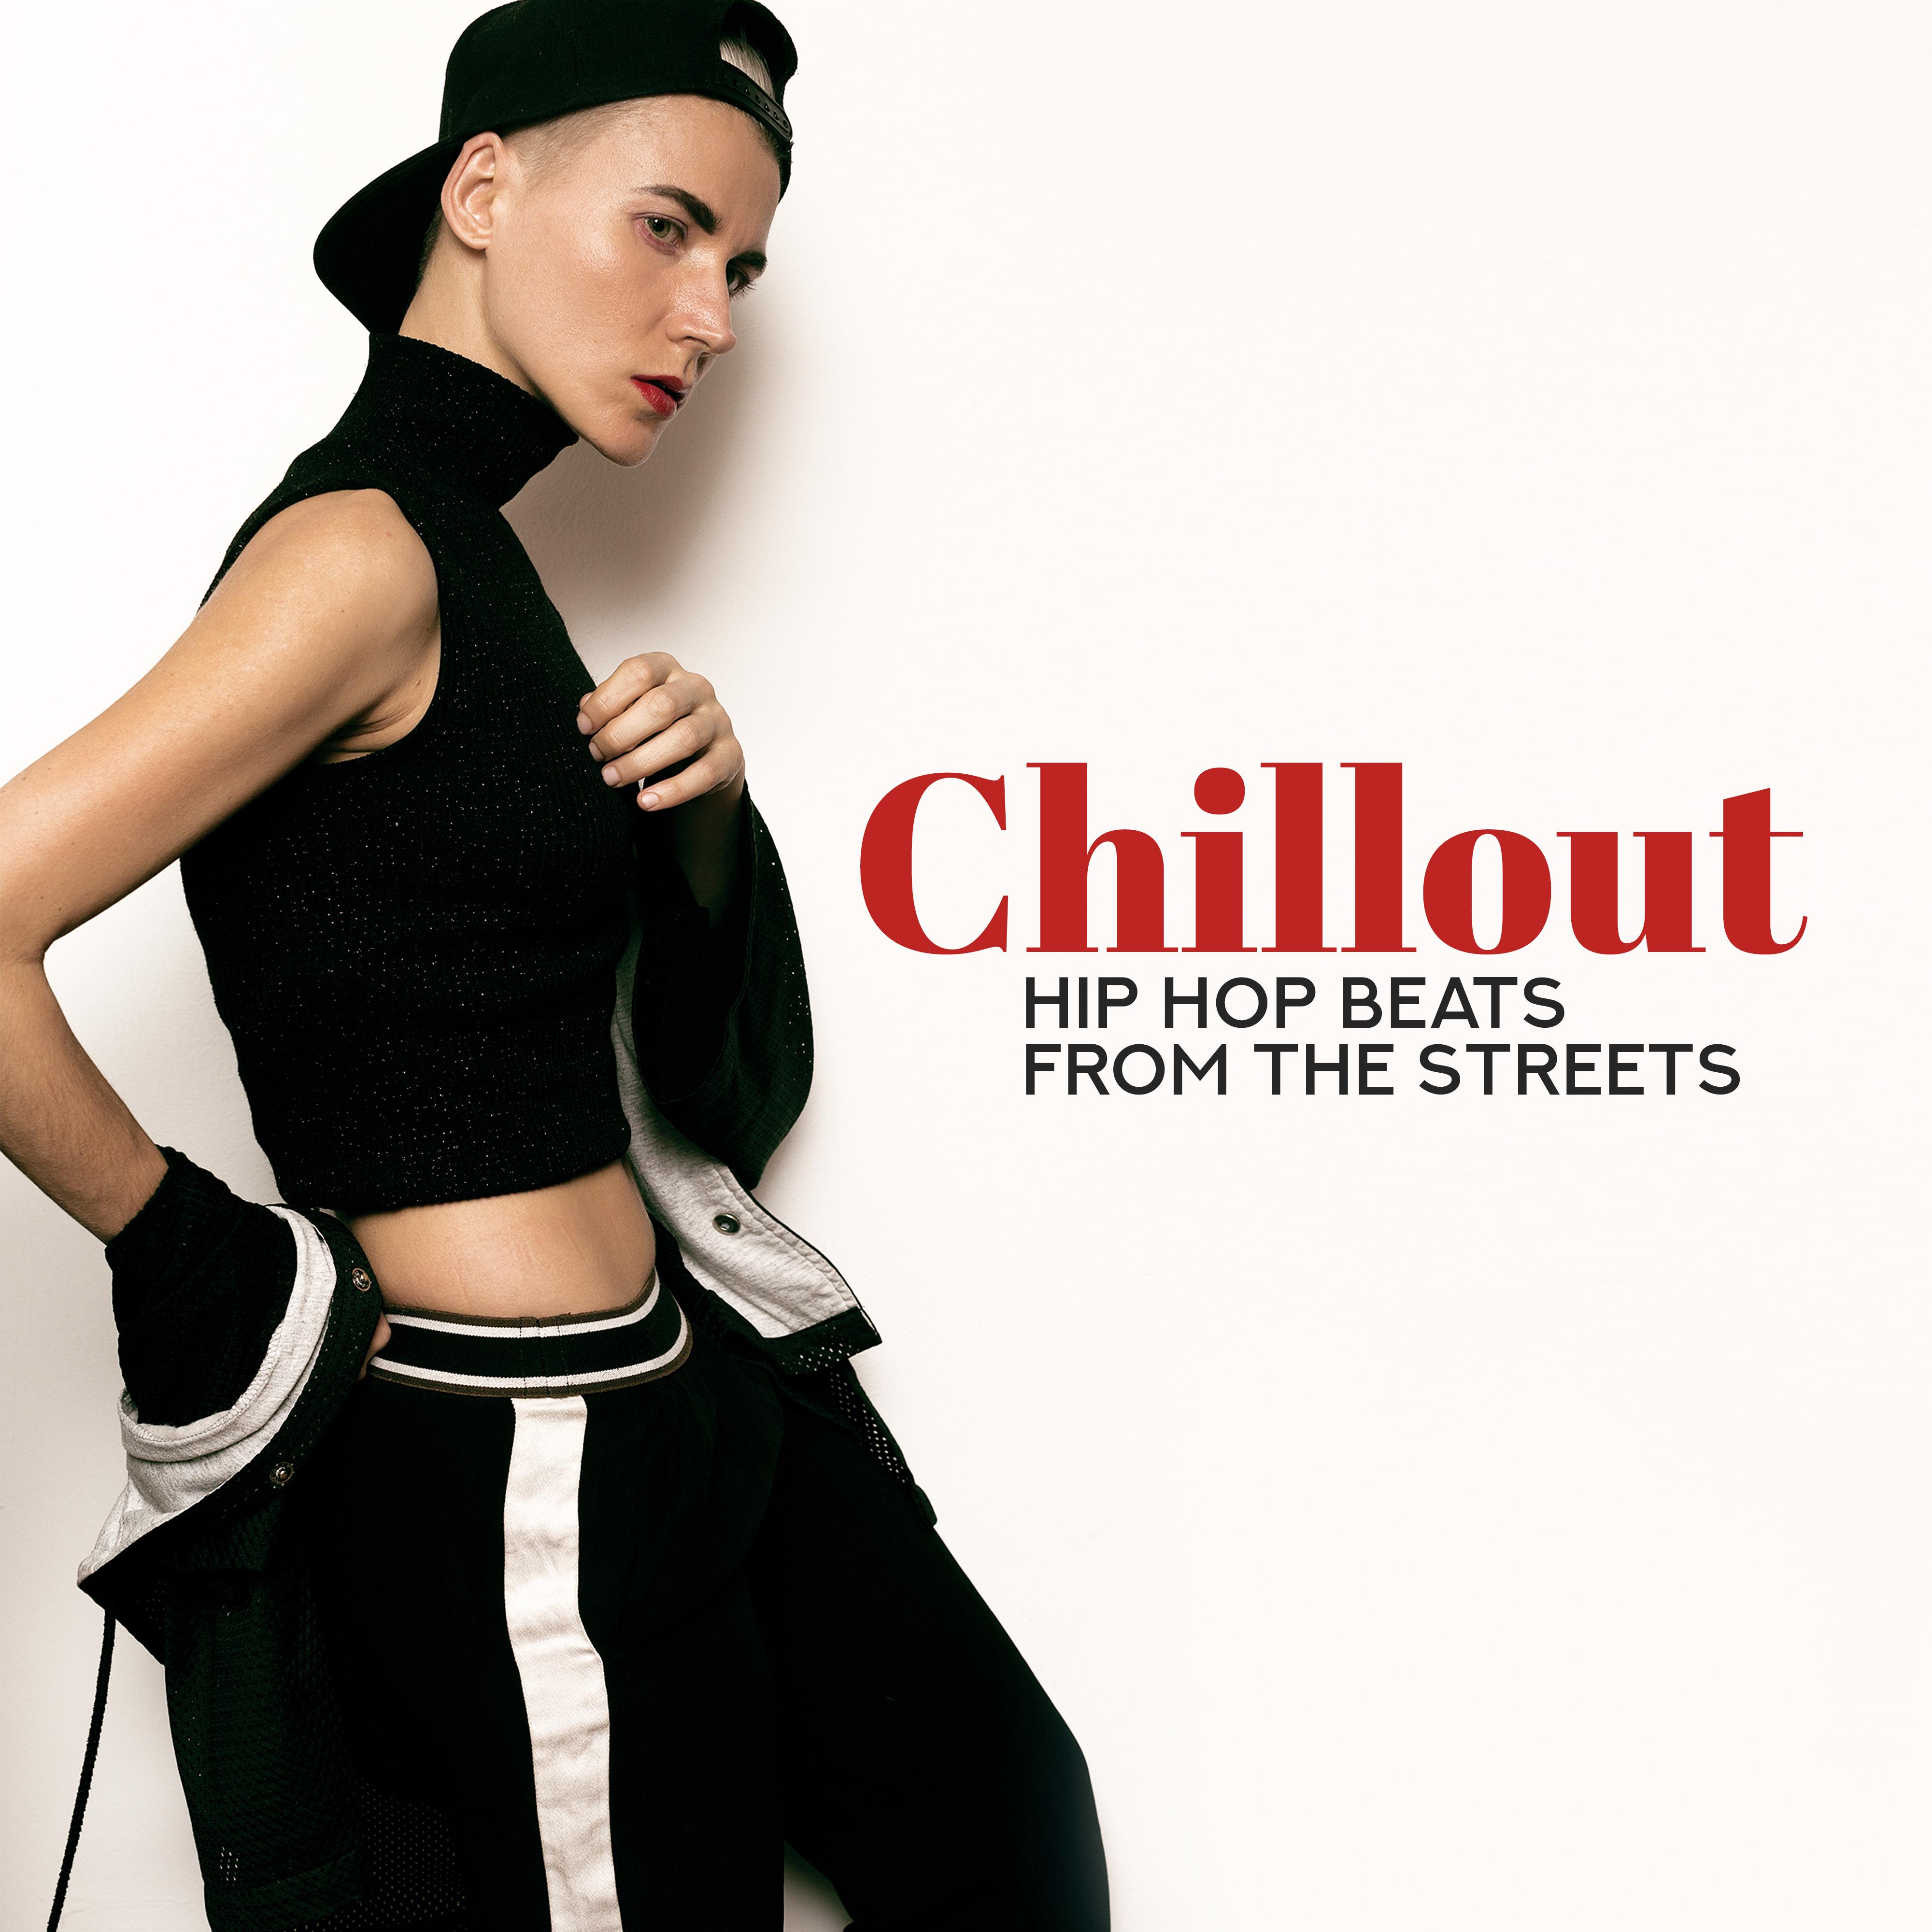 Chillout Hip Hop Beats from the Streets